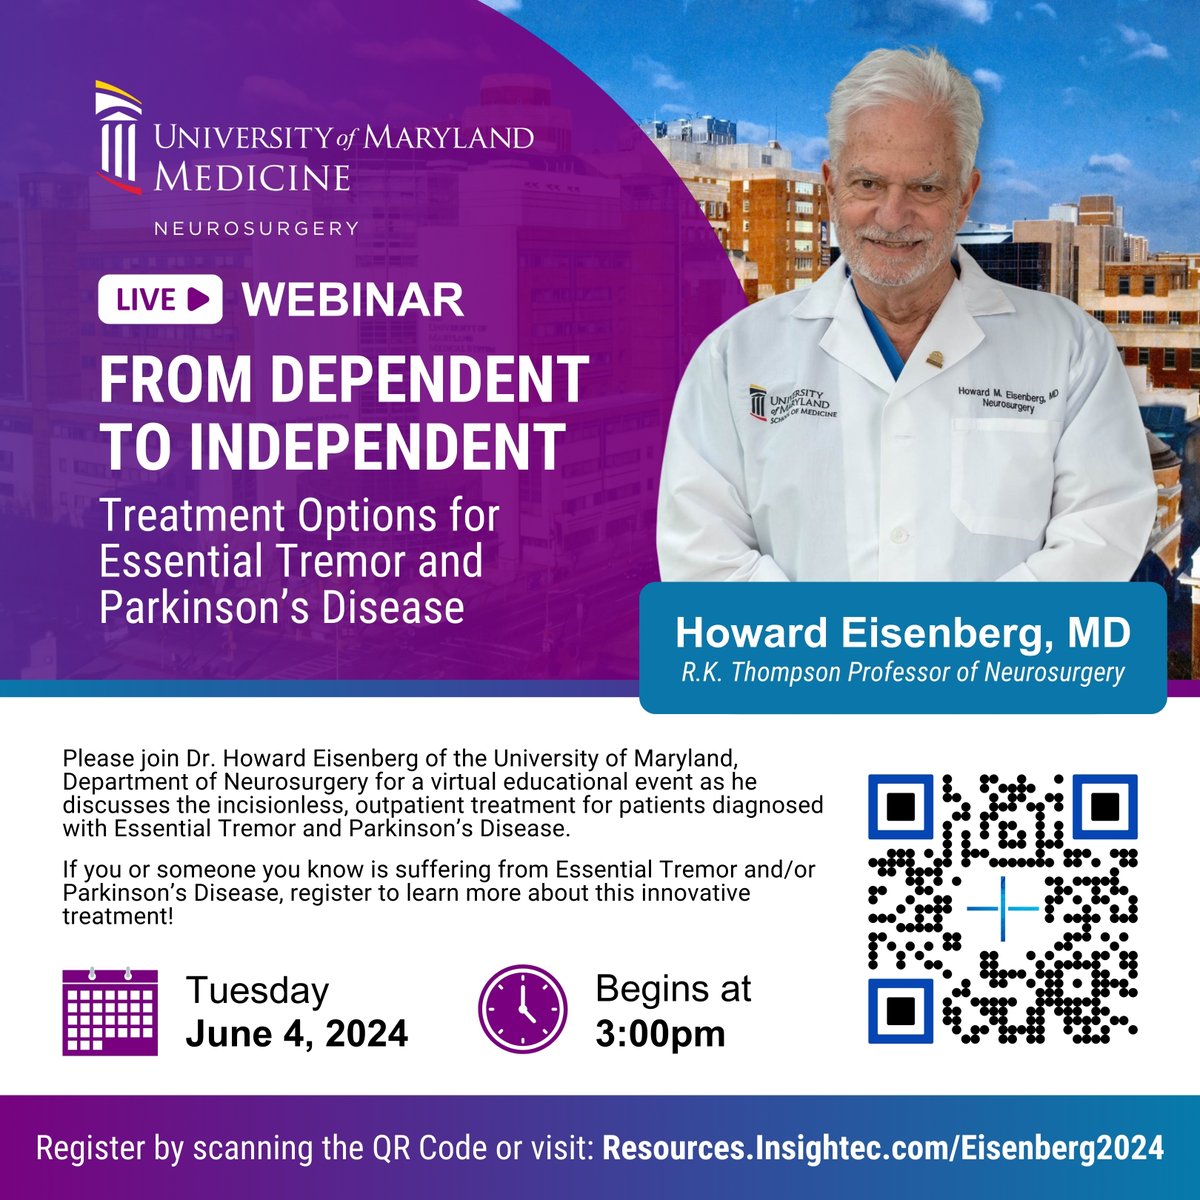 Excited to invite you to my virtual educational event with @INSIGHTEC on incisionless, outpatient treatment for #EssentialTremor & #ParkinsonsDisease. If you or someone you know is affected, join us to learn more about this innovative approach! resources.insightec.com/eisenberg2024